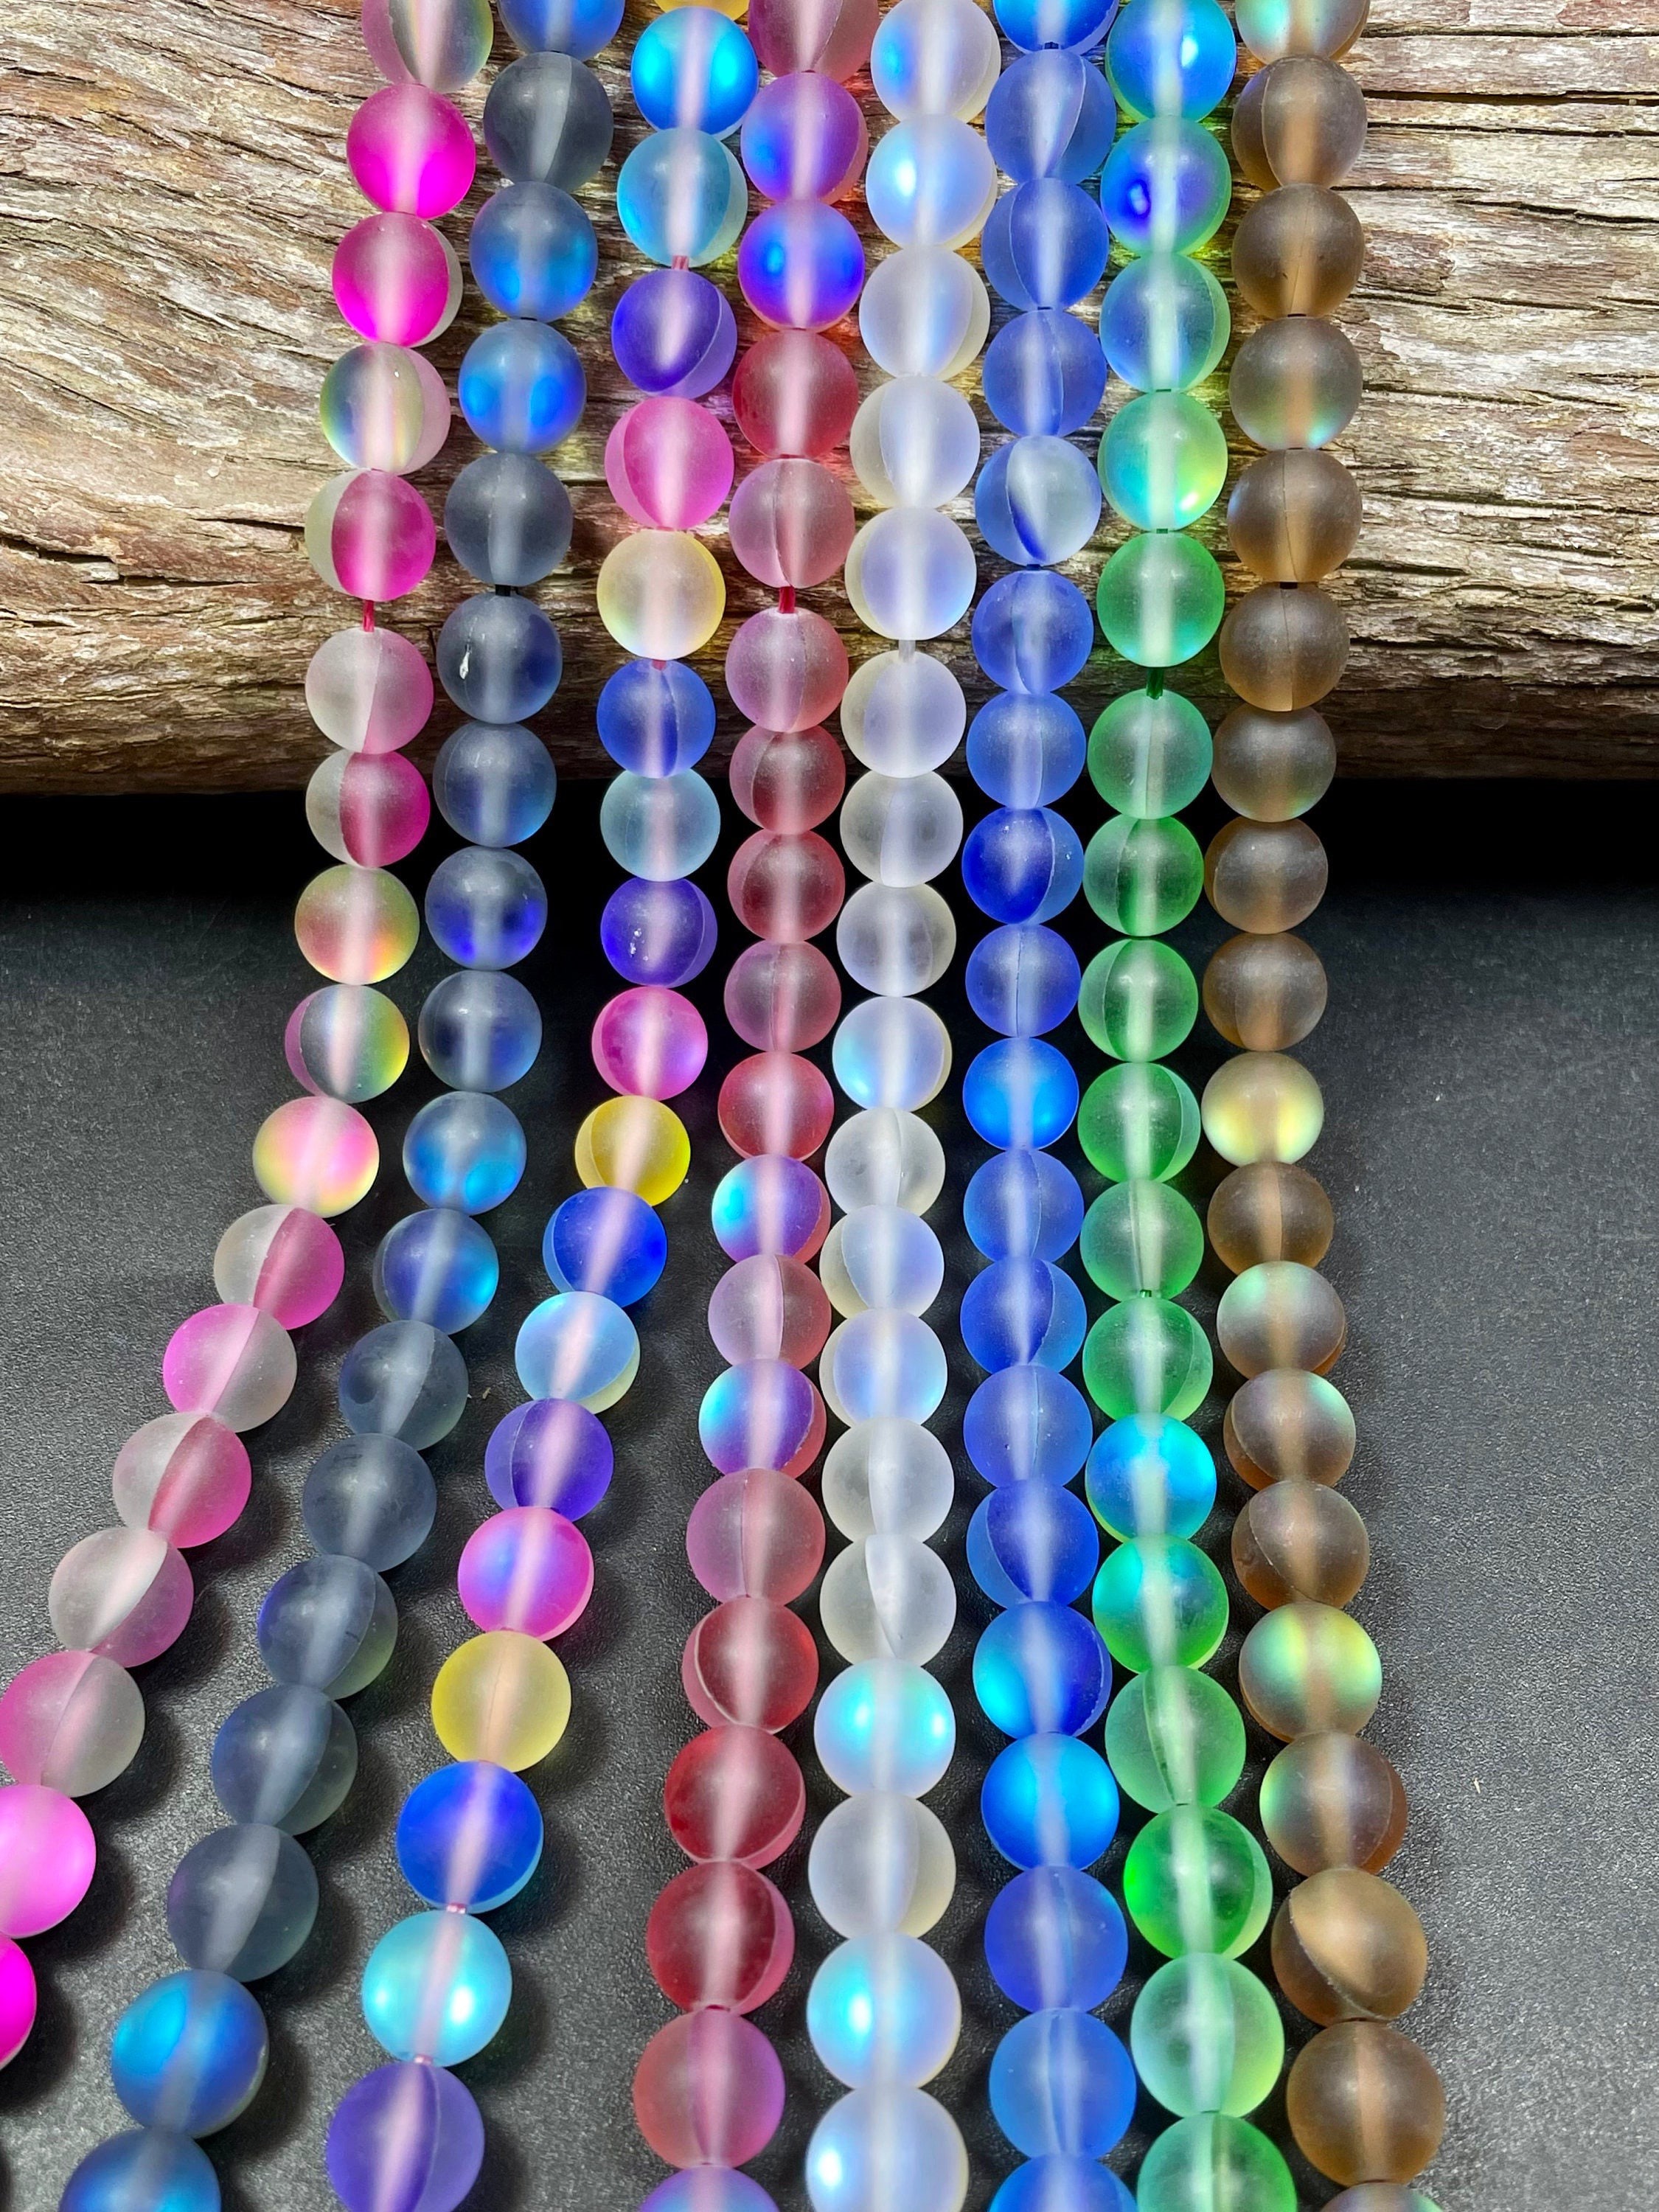 BULK Beautiful Matte Mermaid Glass Beads 6mm 8mm 10mm Round Shape. Mixed  Multi Colors With Rainbow Flashes, High Quality Full Strands 